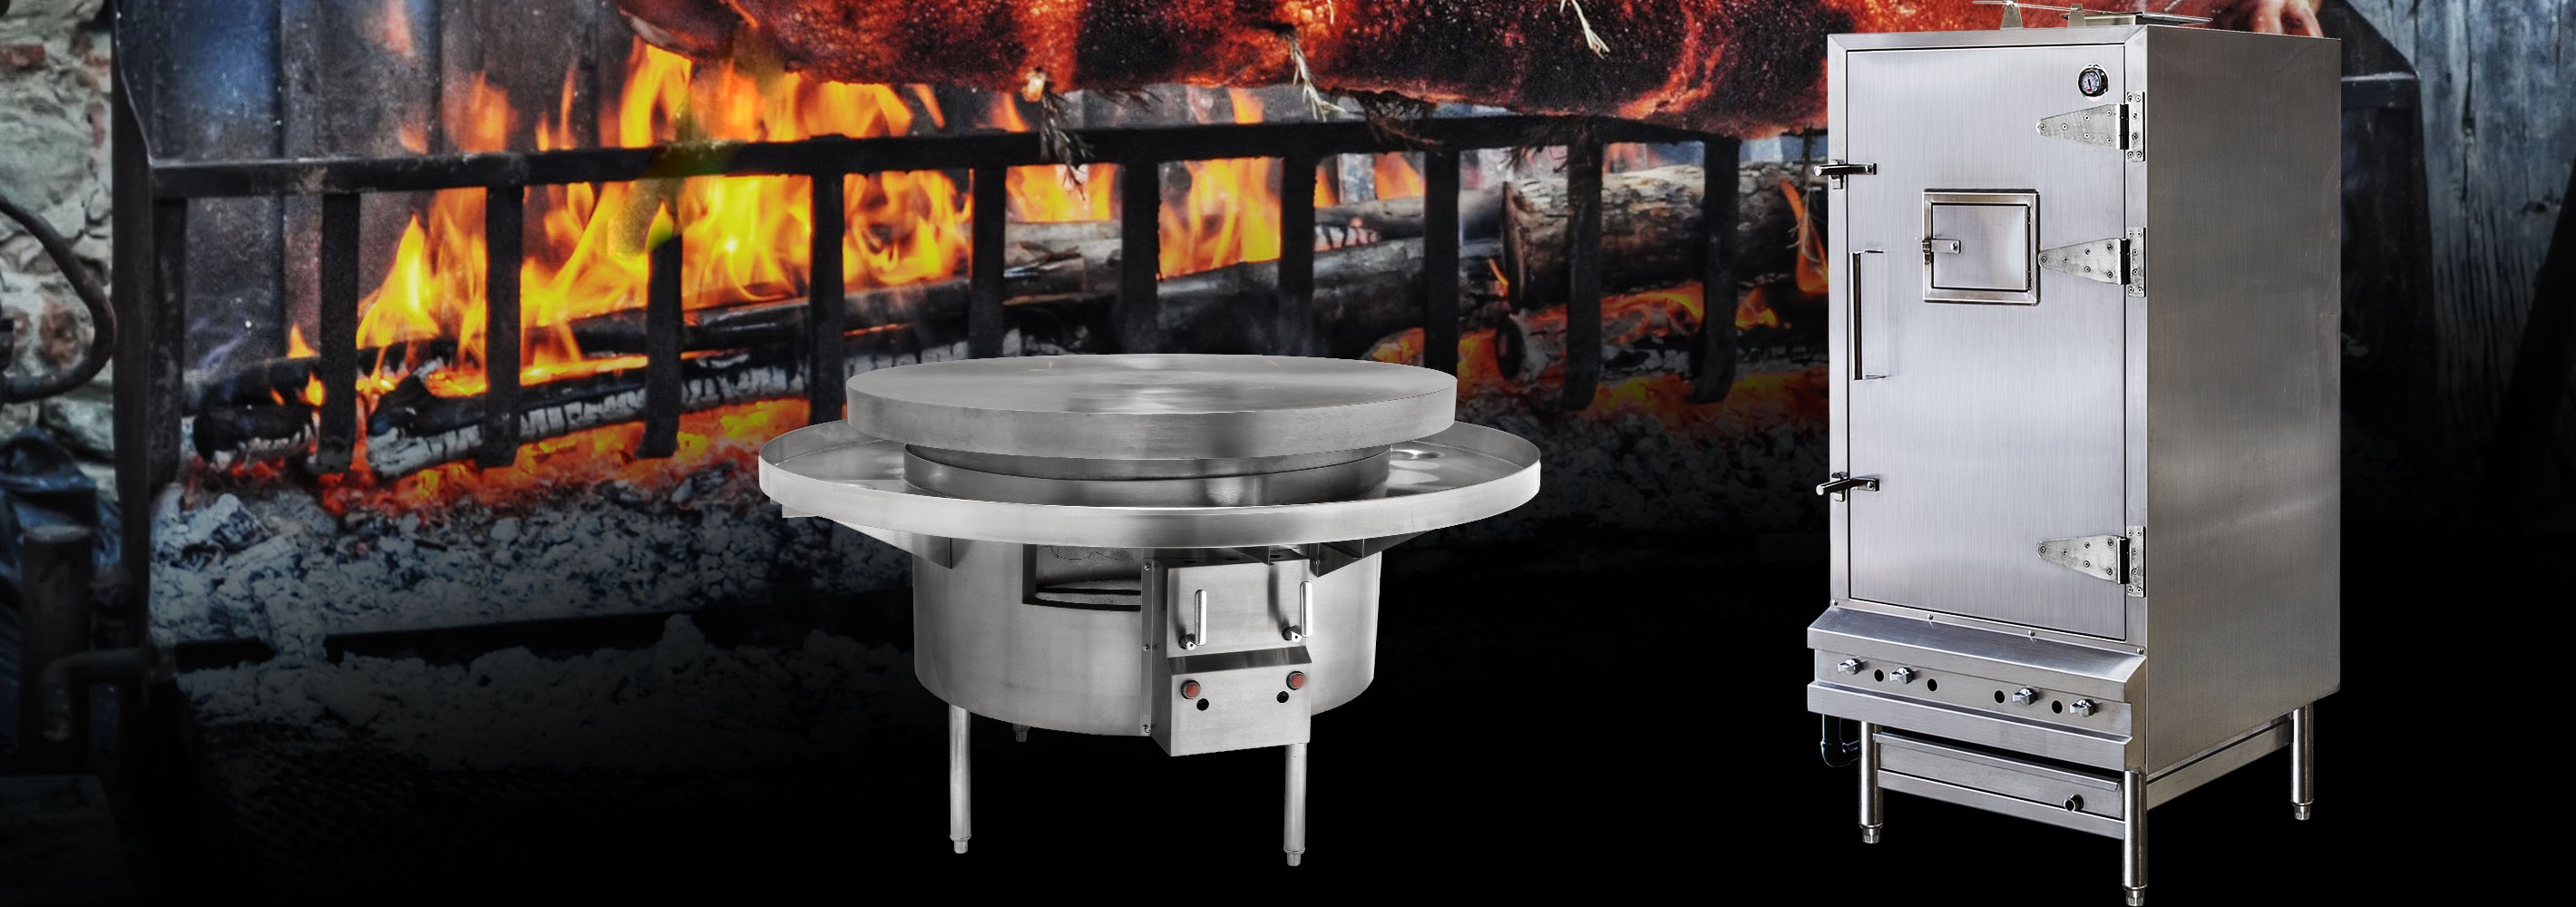 GSW Stainless Steel BBQ Ovens, Mongolian Ovens